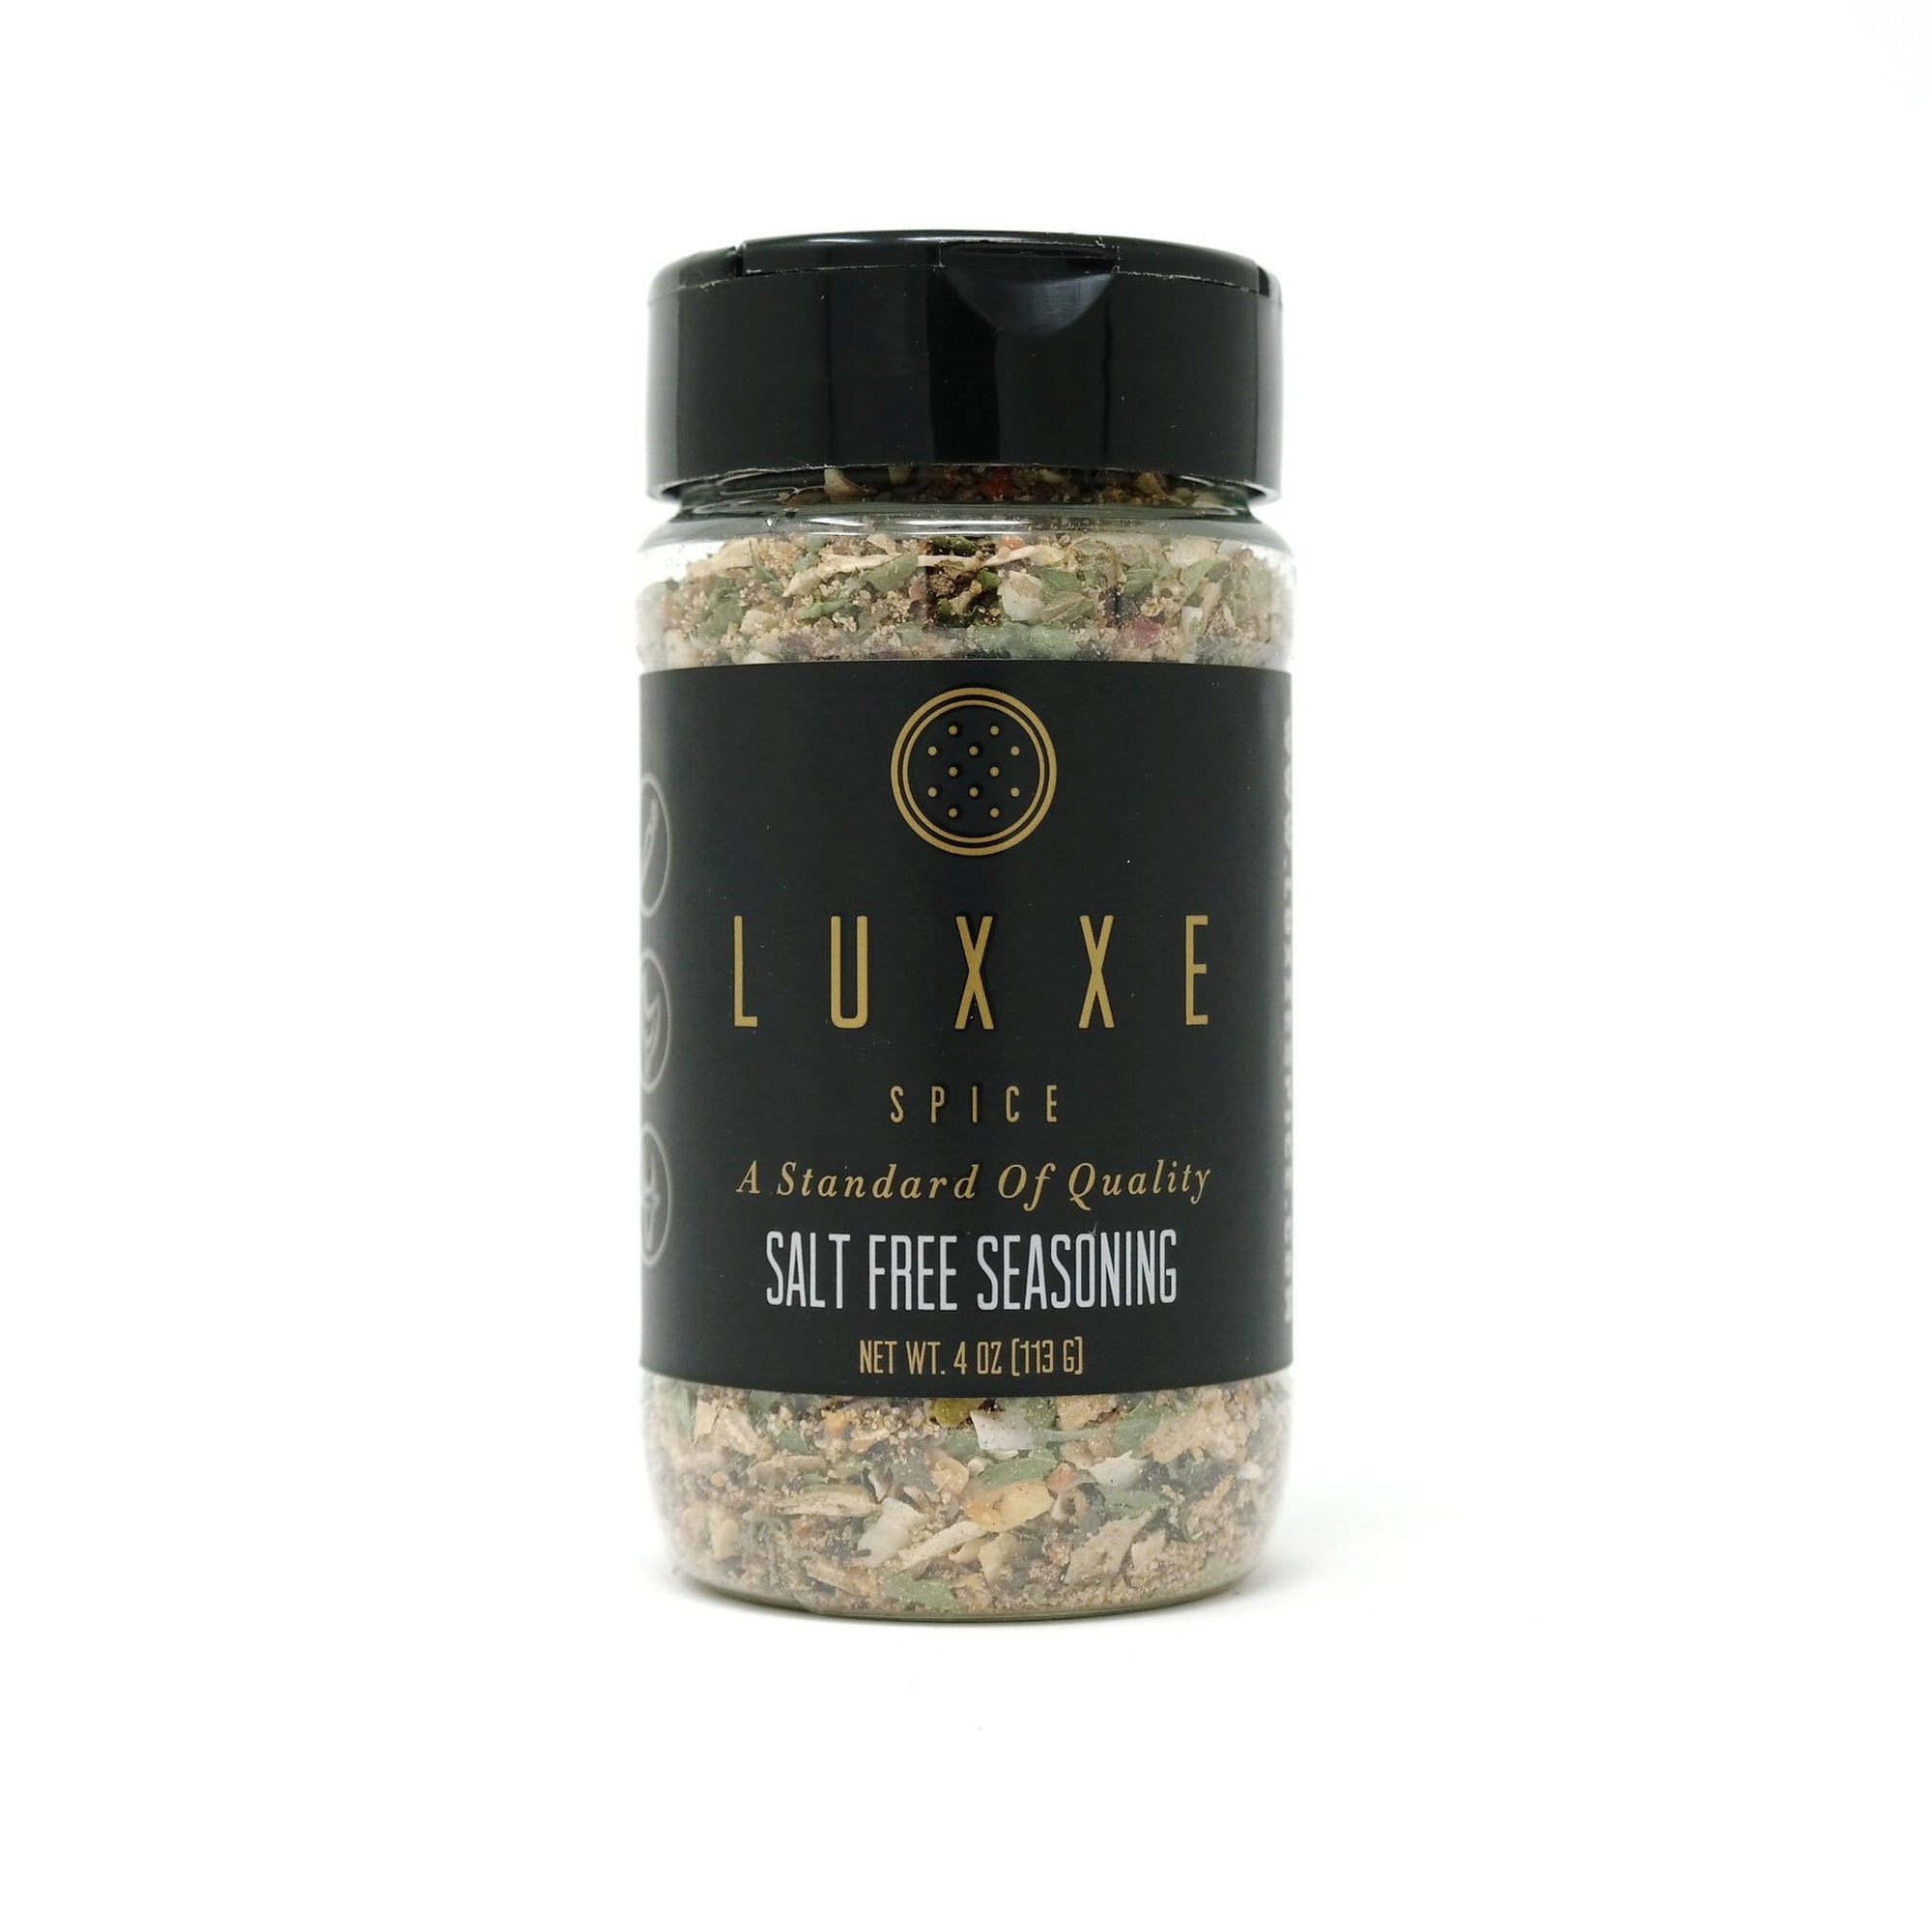 Shop for Salt-Free Spices and Seasonings